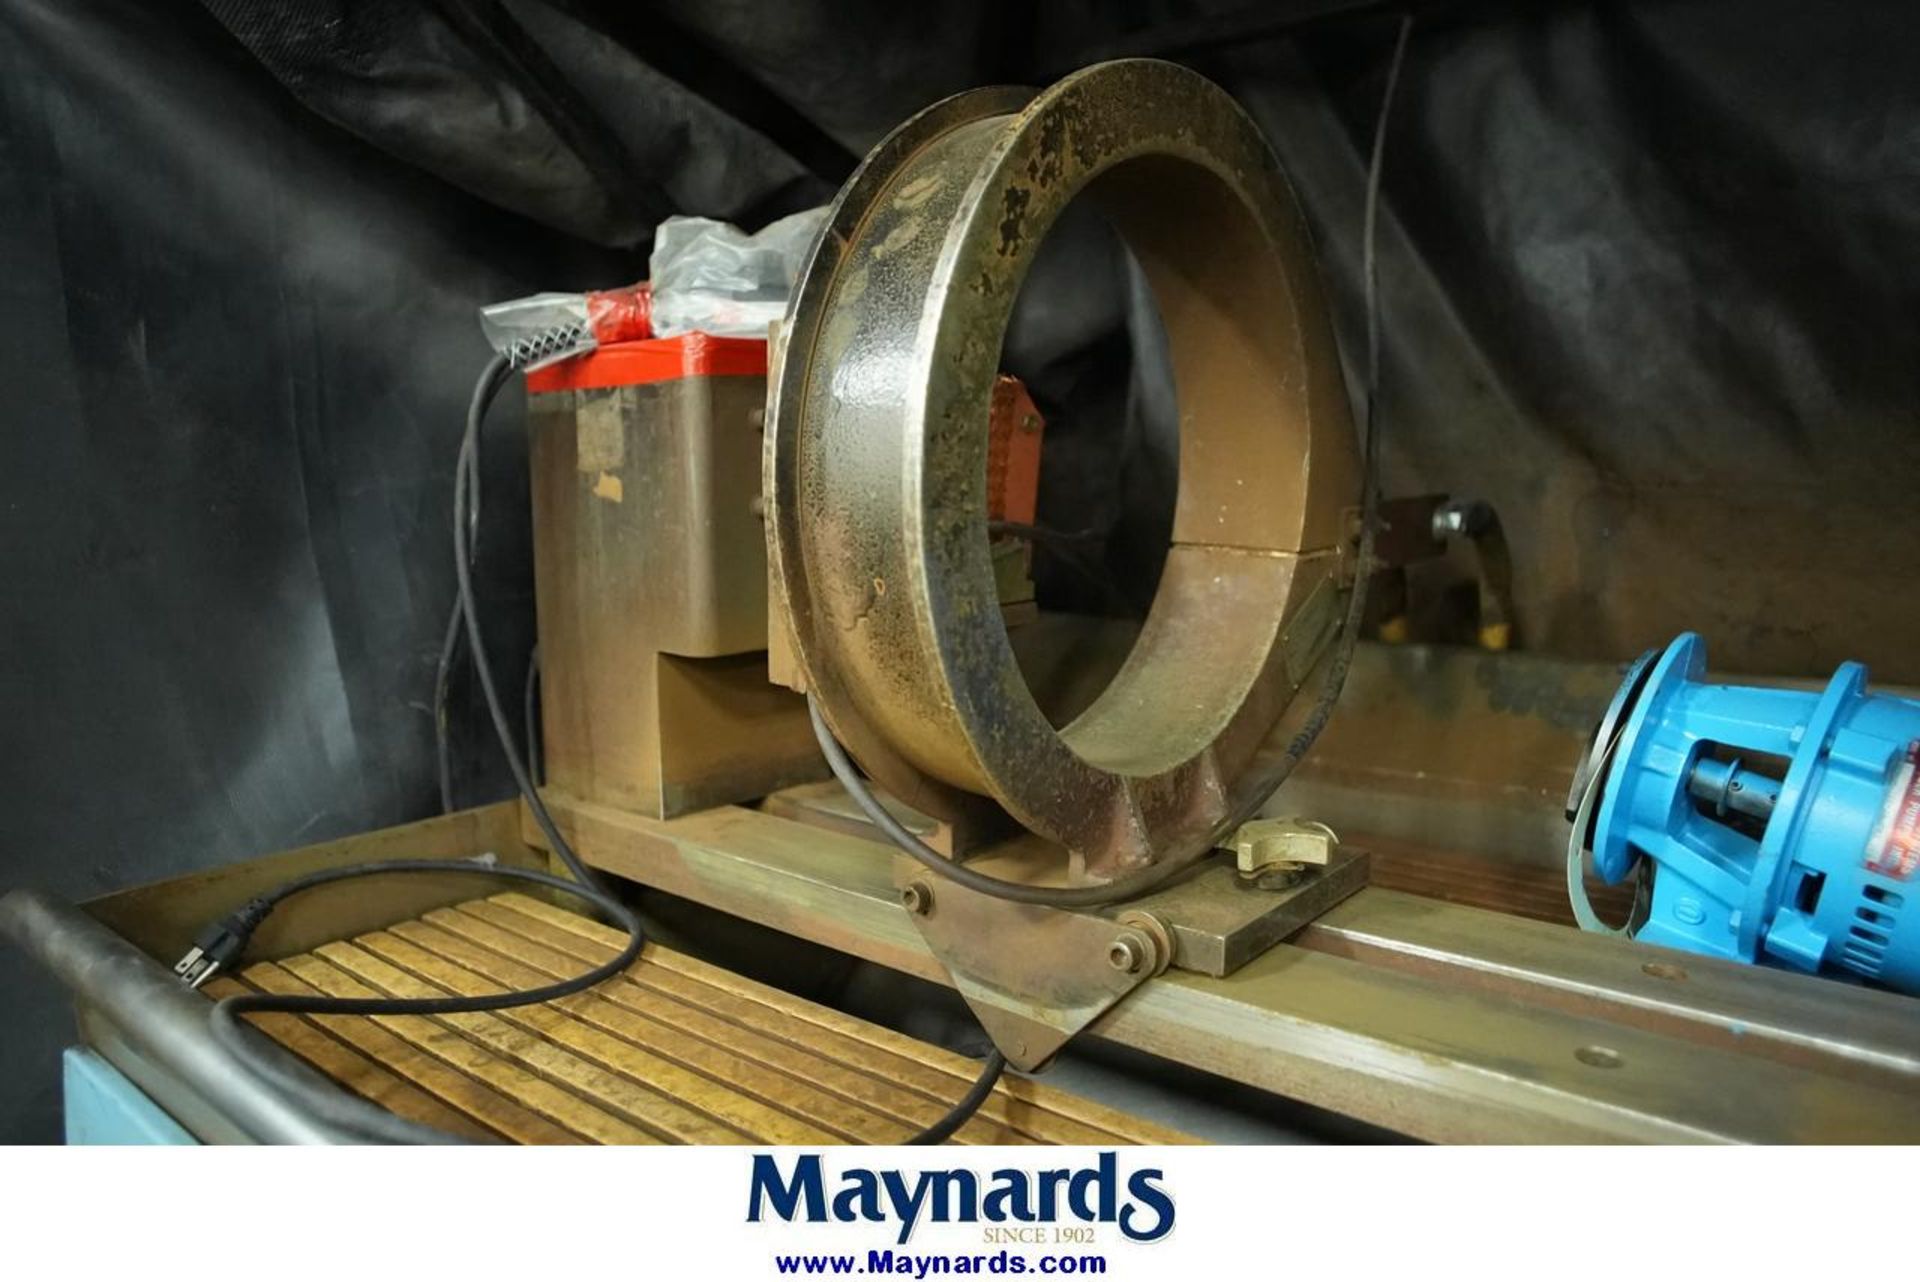 Ardrox Model 3453 Magnetic Particle Inspection Machine - Image 4 of 7